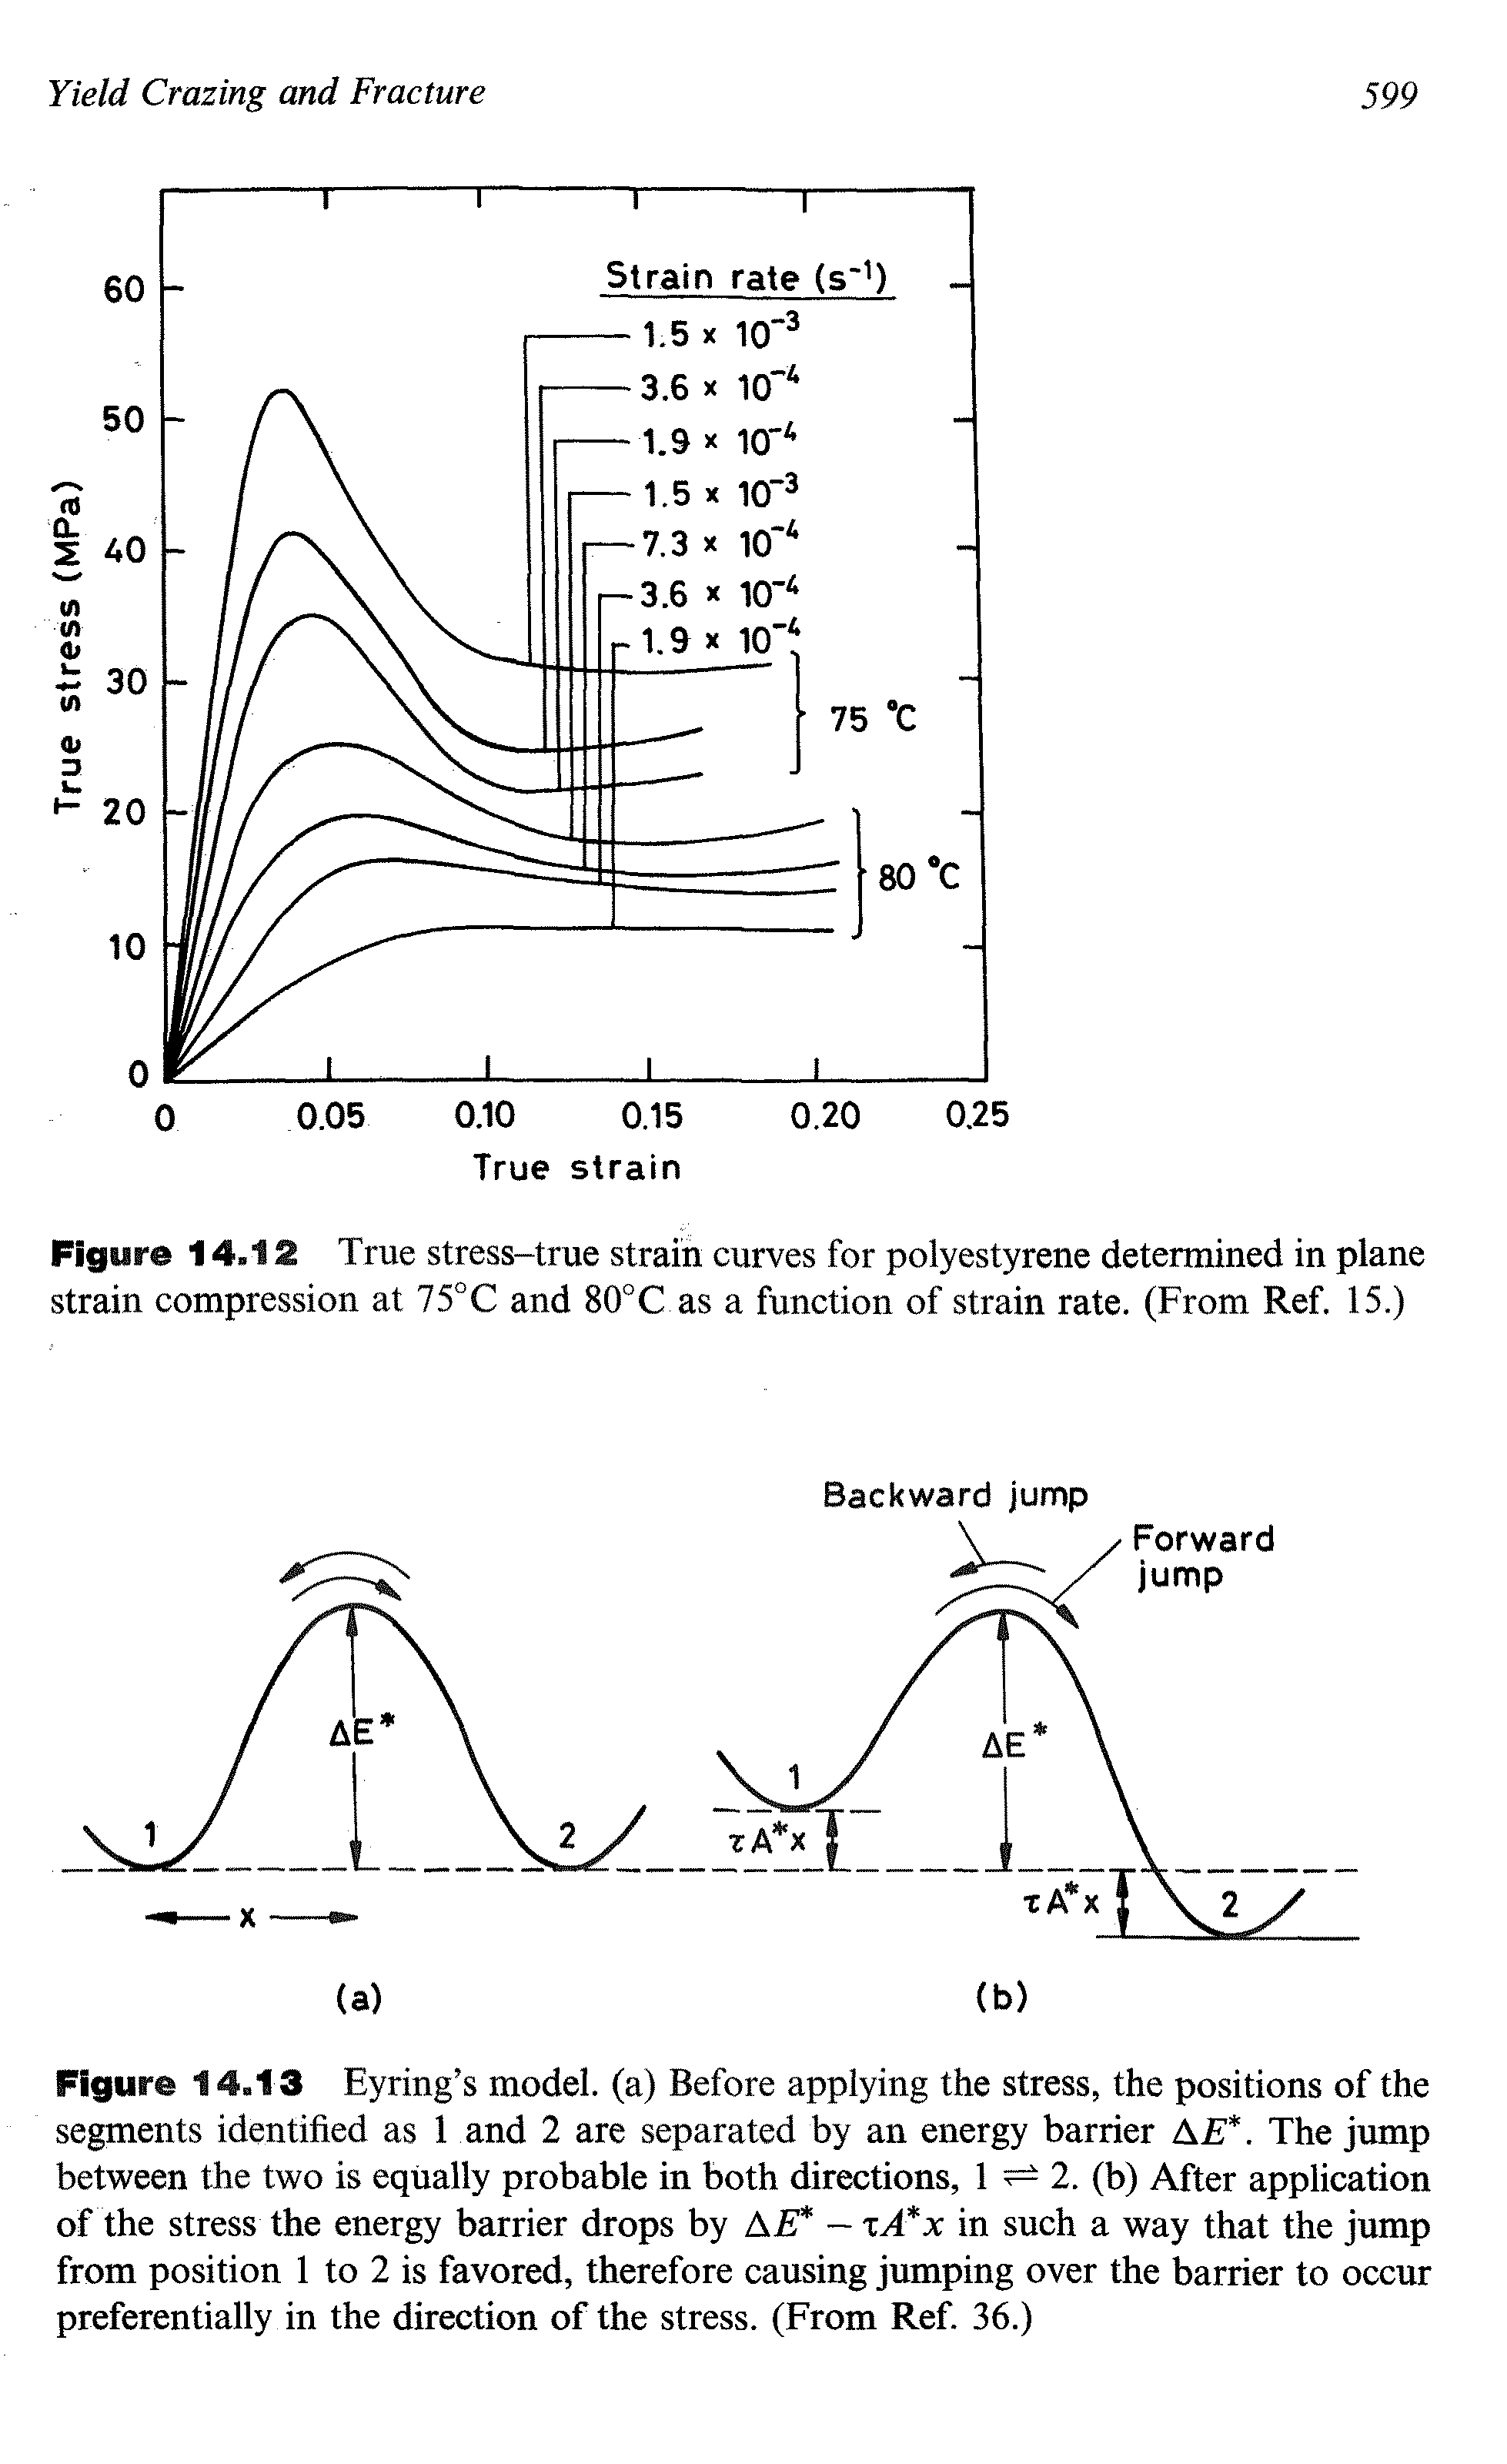 Figure 14.13 Eyring s model, (a) Before applying the stress, the positions of the segments identified as 1 and 2 are separated by an energy barrier AE. The jump between the two is equally probable in both directions, 1 2. (b) After application of the stress the energy barrier drops by AE — in such a way that the jump from position 1 to 2 is favored, therefore causing jumping over the barrier to occur preferentially in the direction of the stress. (From Ref. 36.)...